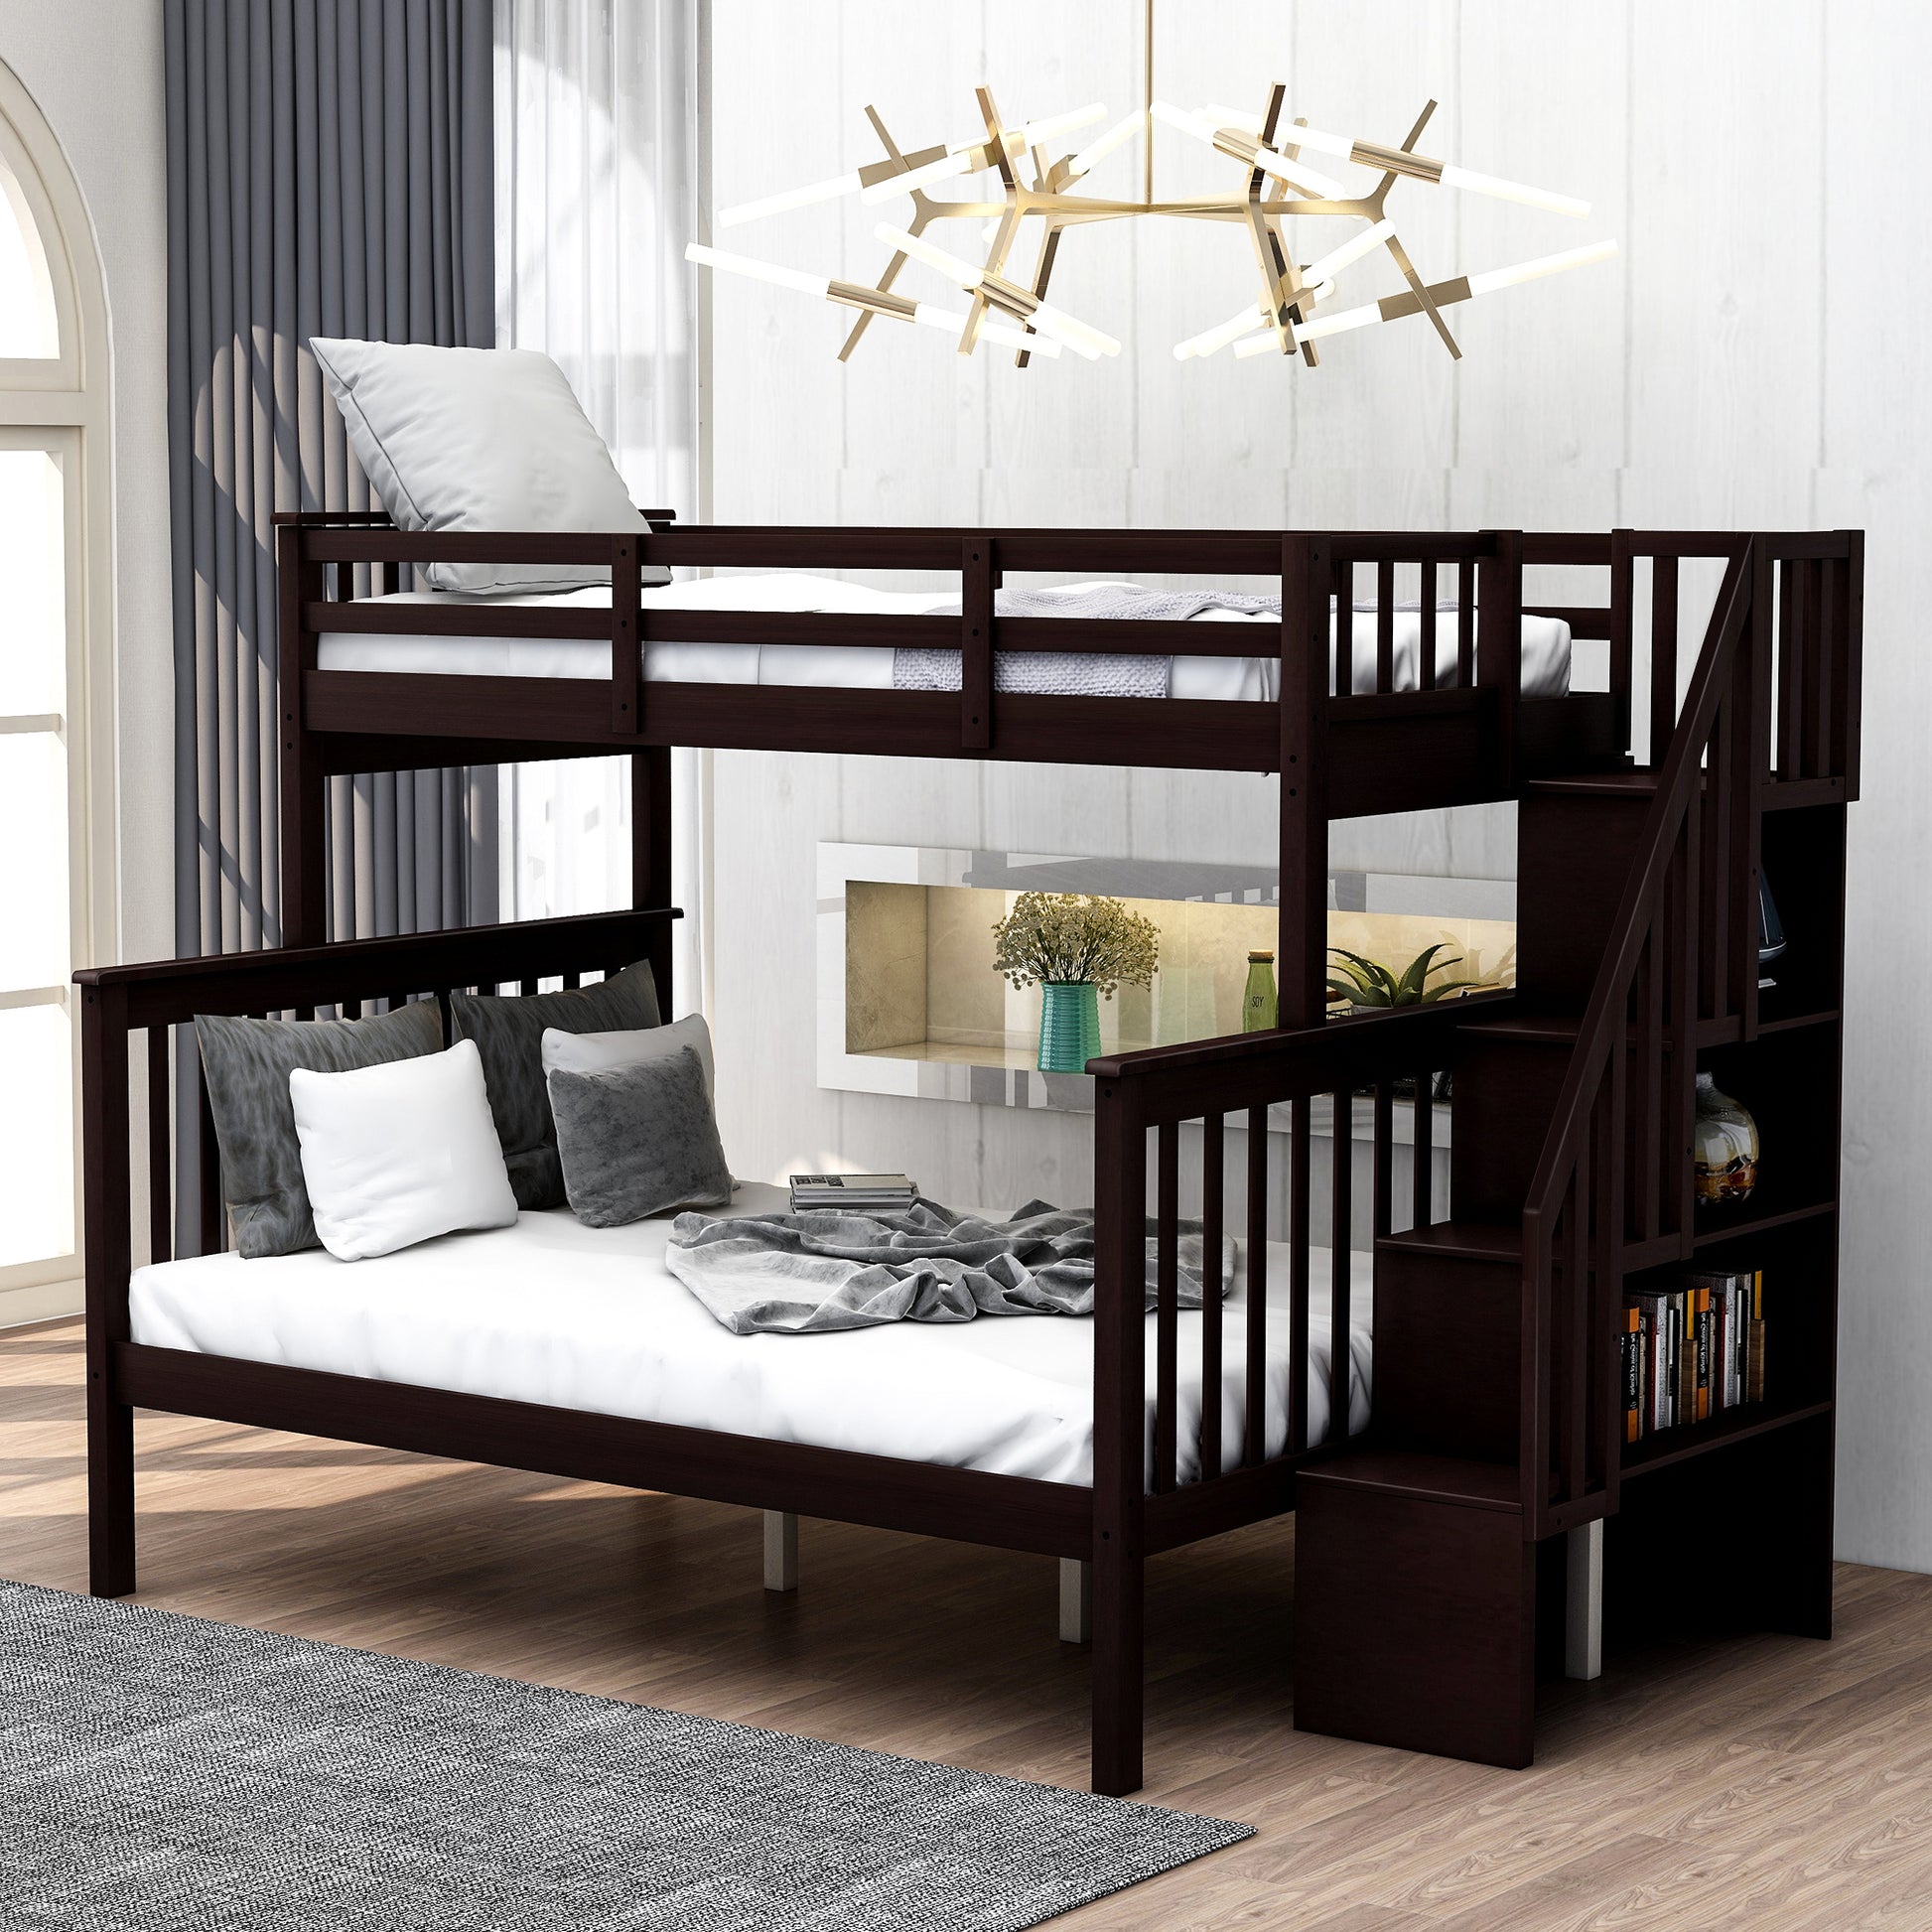 Twin-Over-Full Bunk Bed with Storage in Espresso